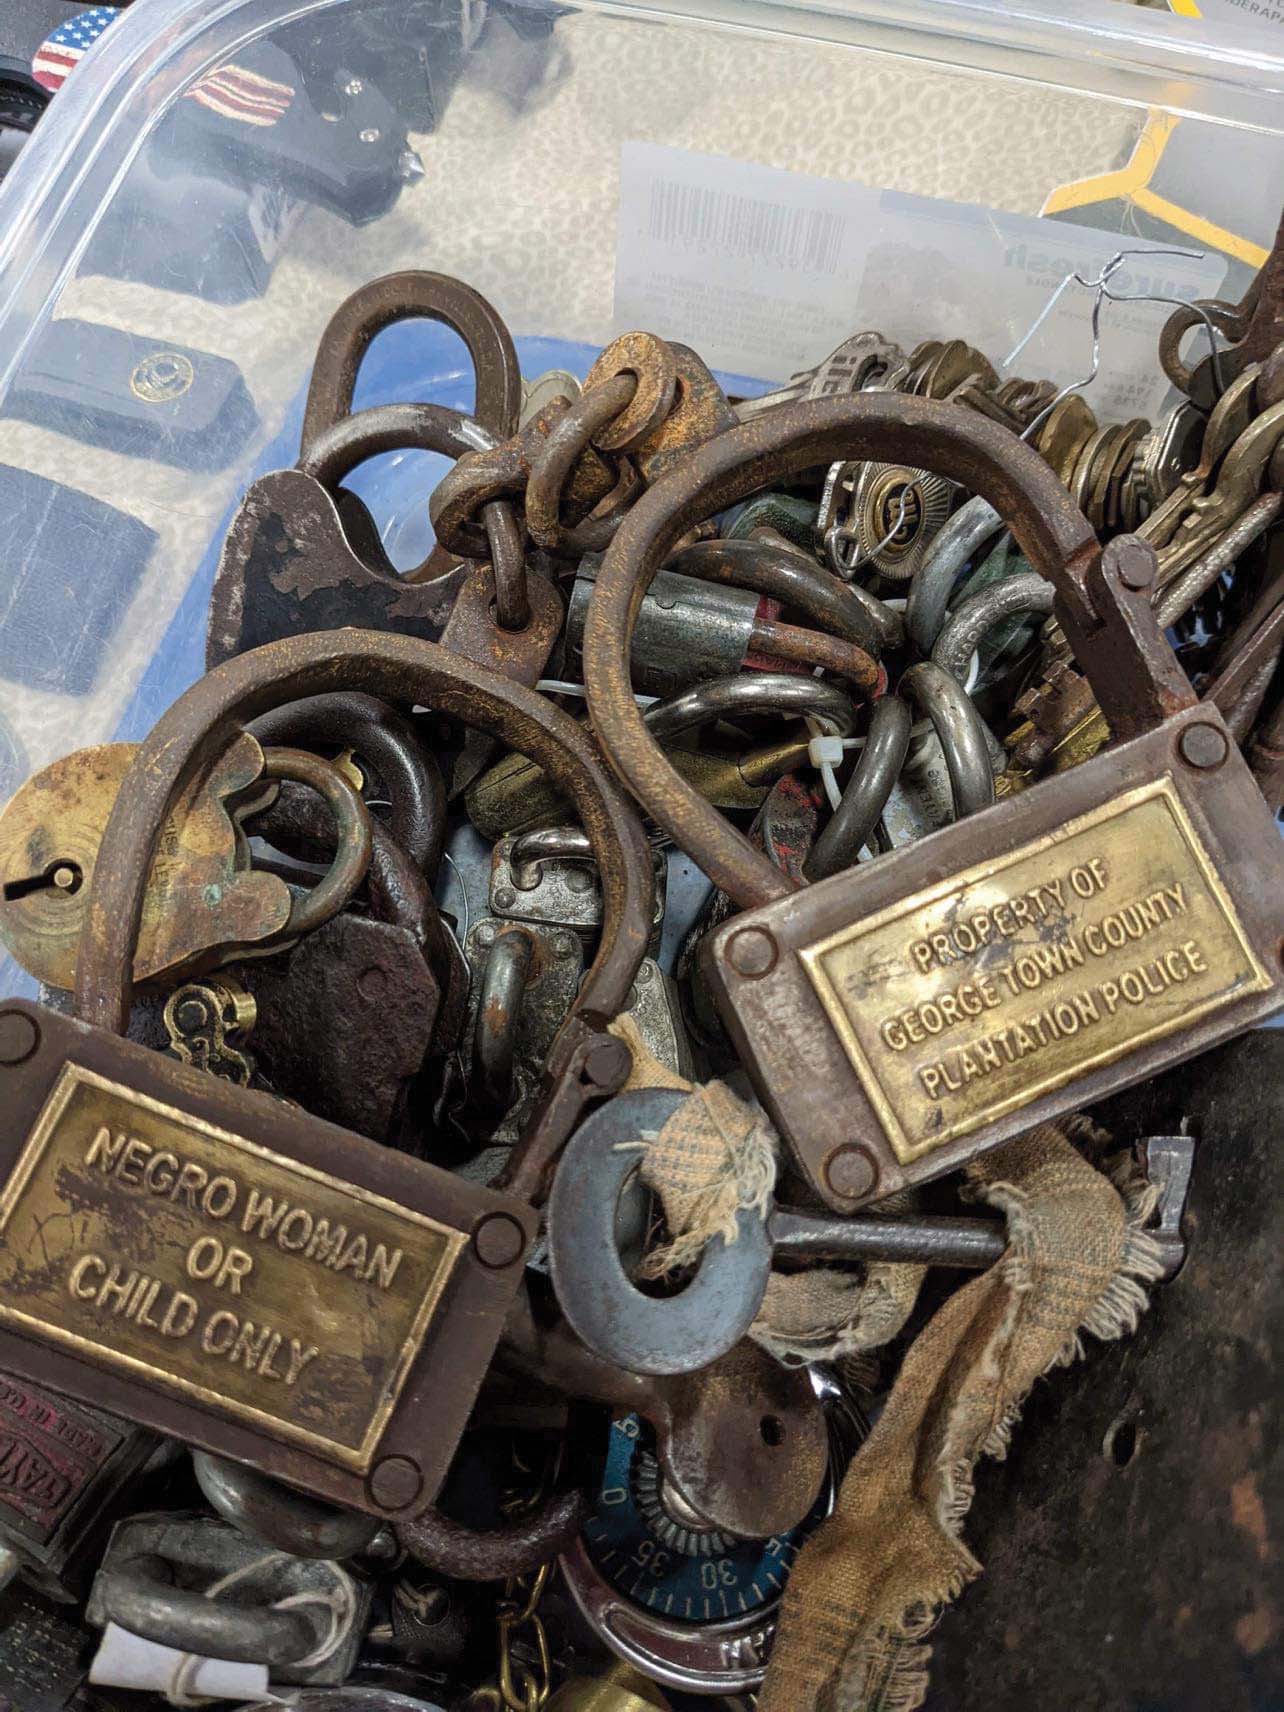 Rutland NAACP pushes to ban sale of racist items after slavery-era shackles sighted at local gun show